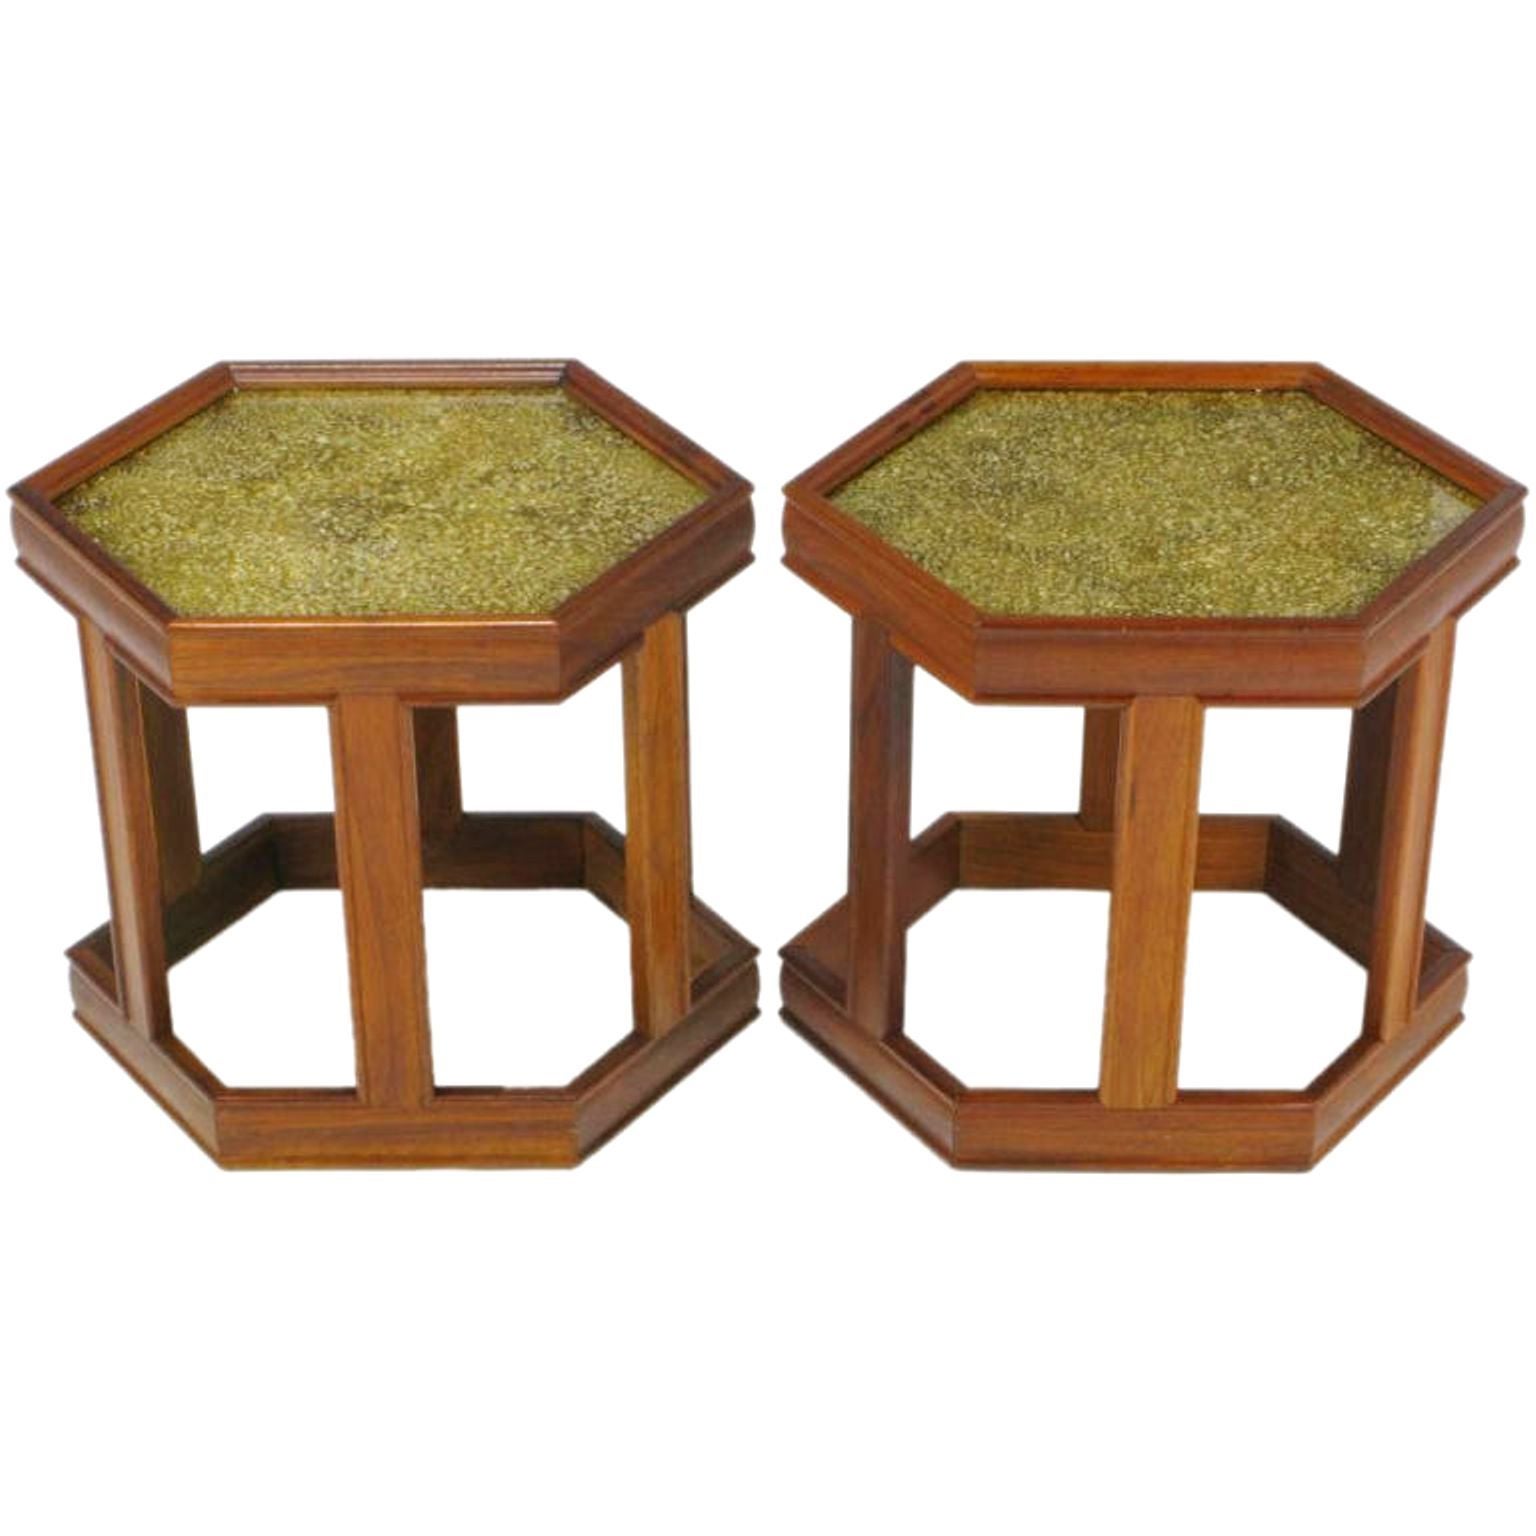 Pair of Brown Saltman Walnut and Reverse Painted Glass Side Tables